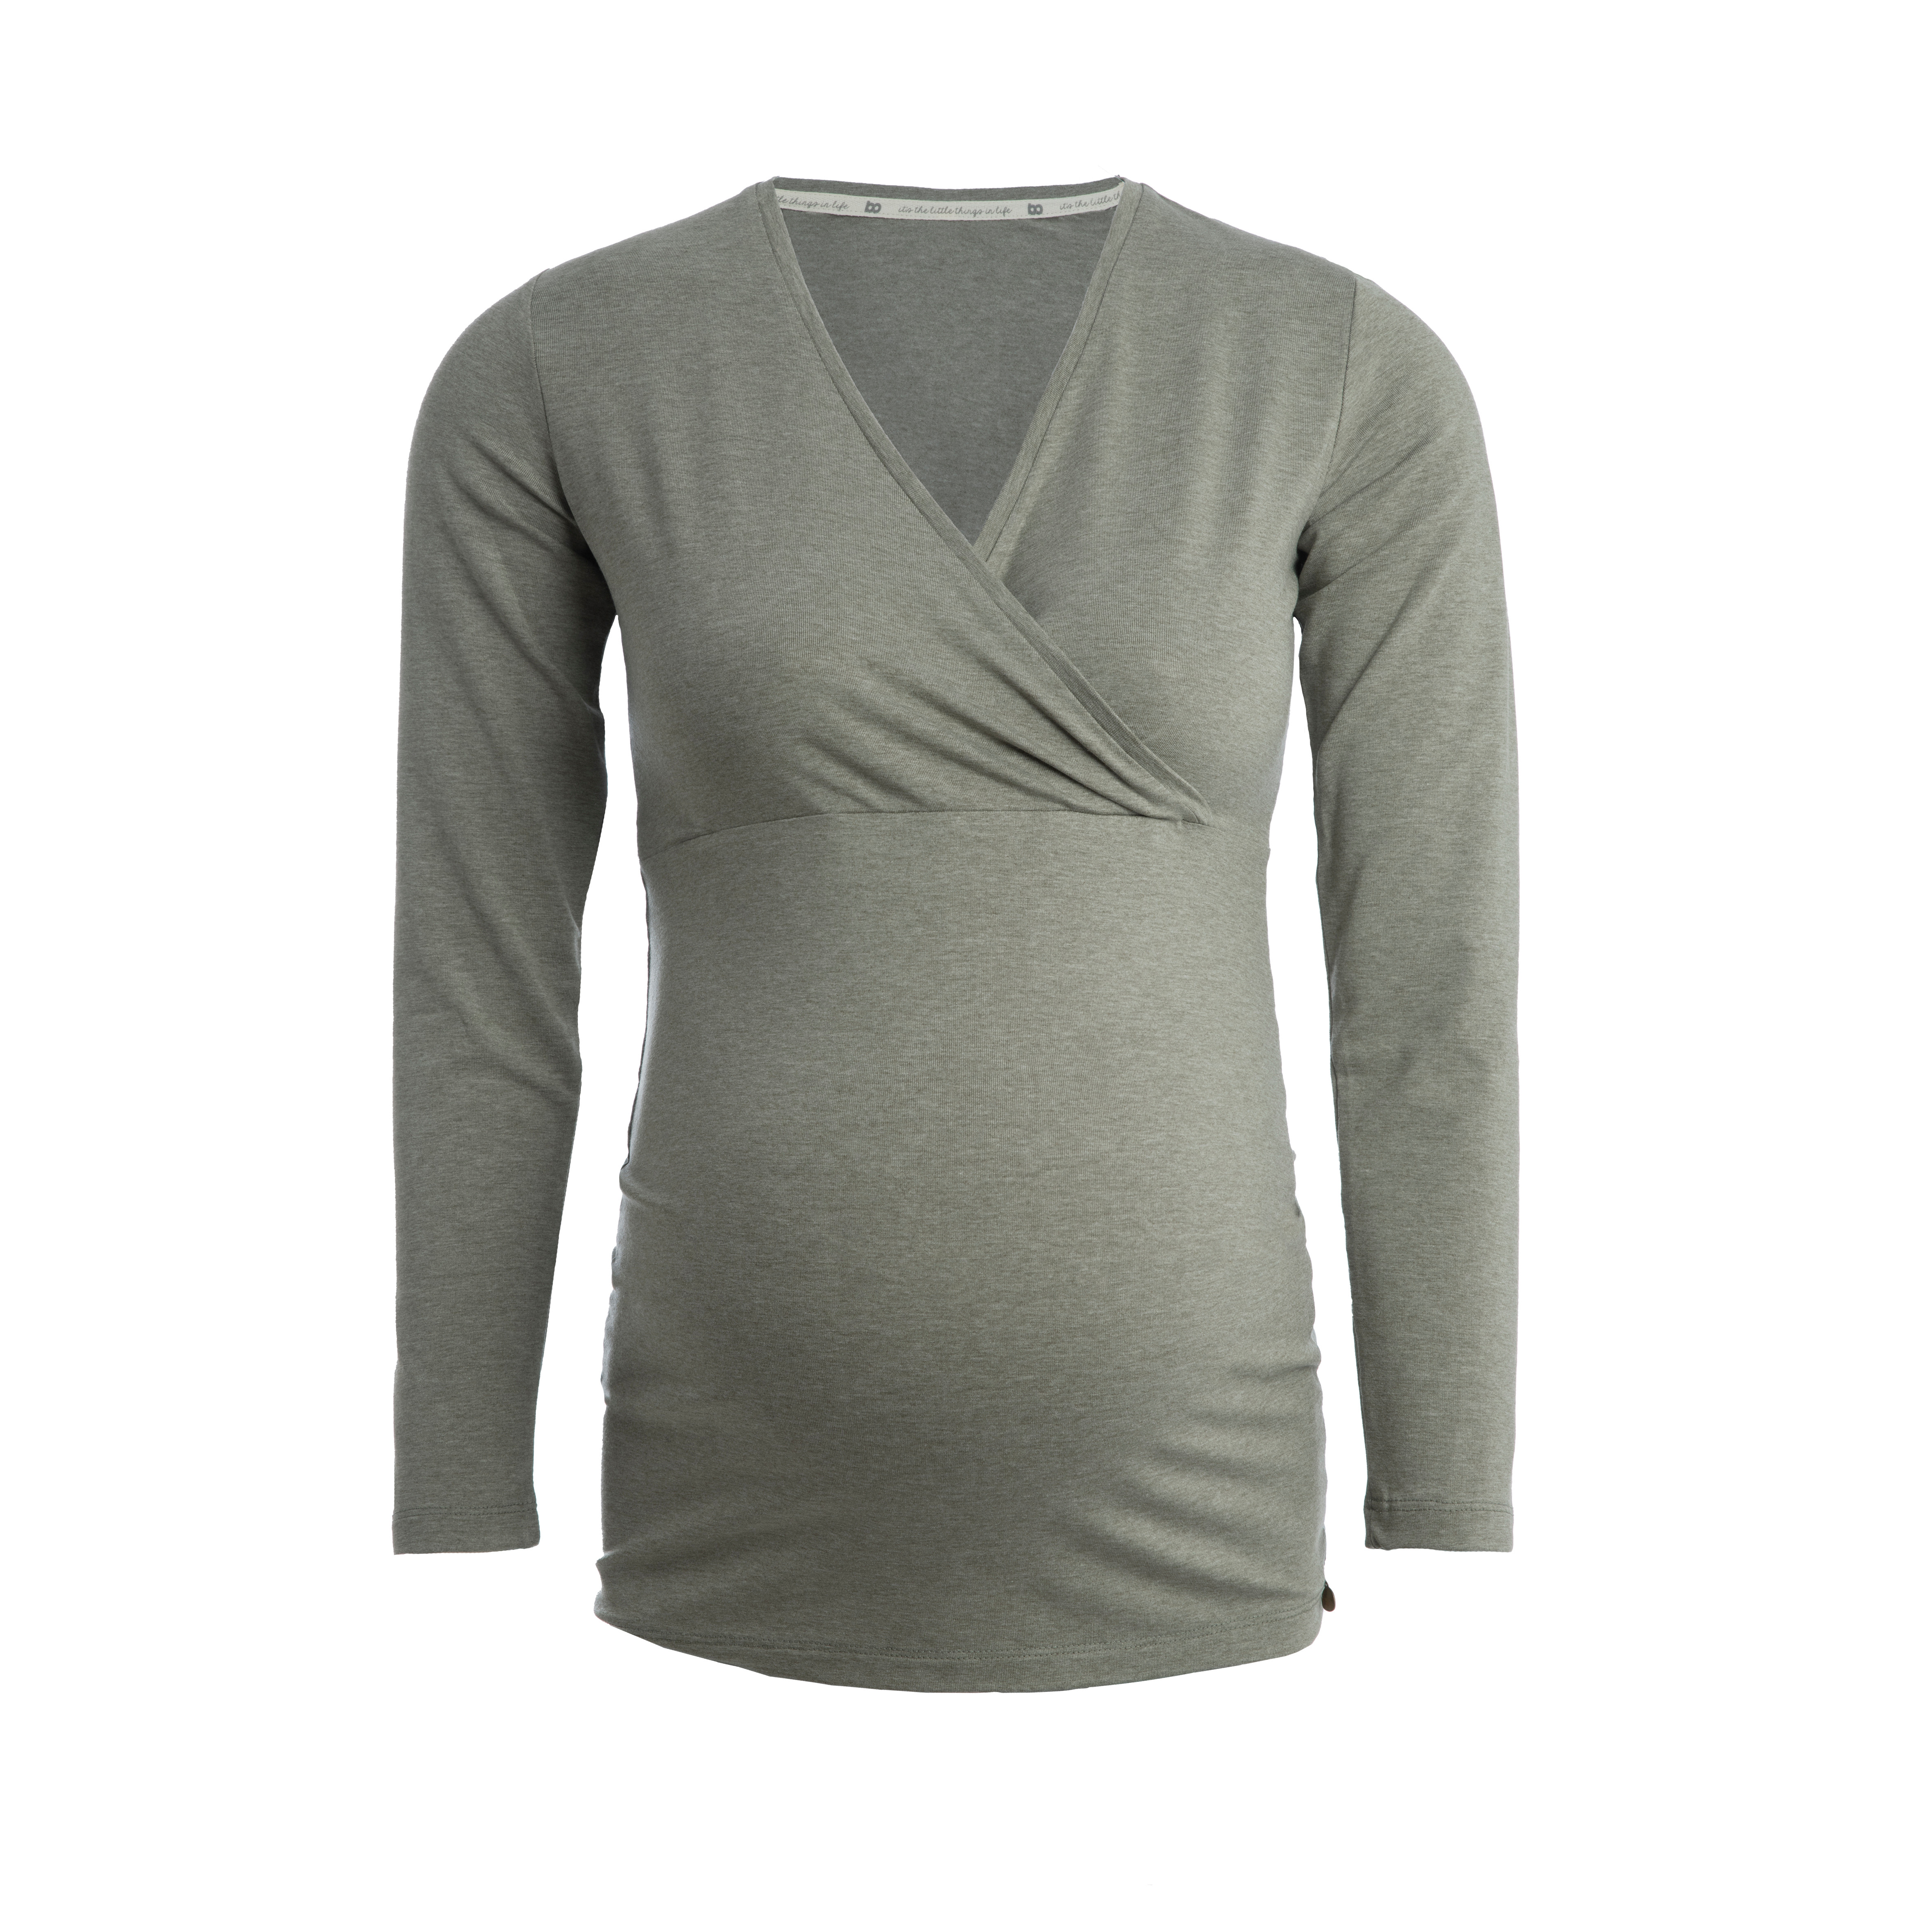 Maternity long sleeve top Glow urban green - S - With nursing function